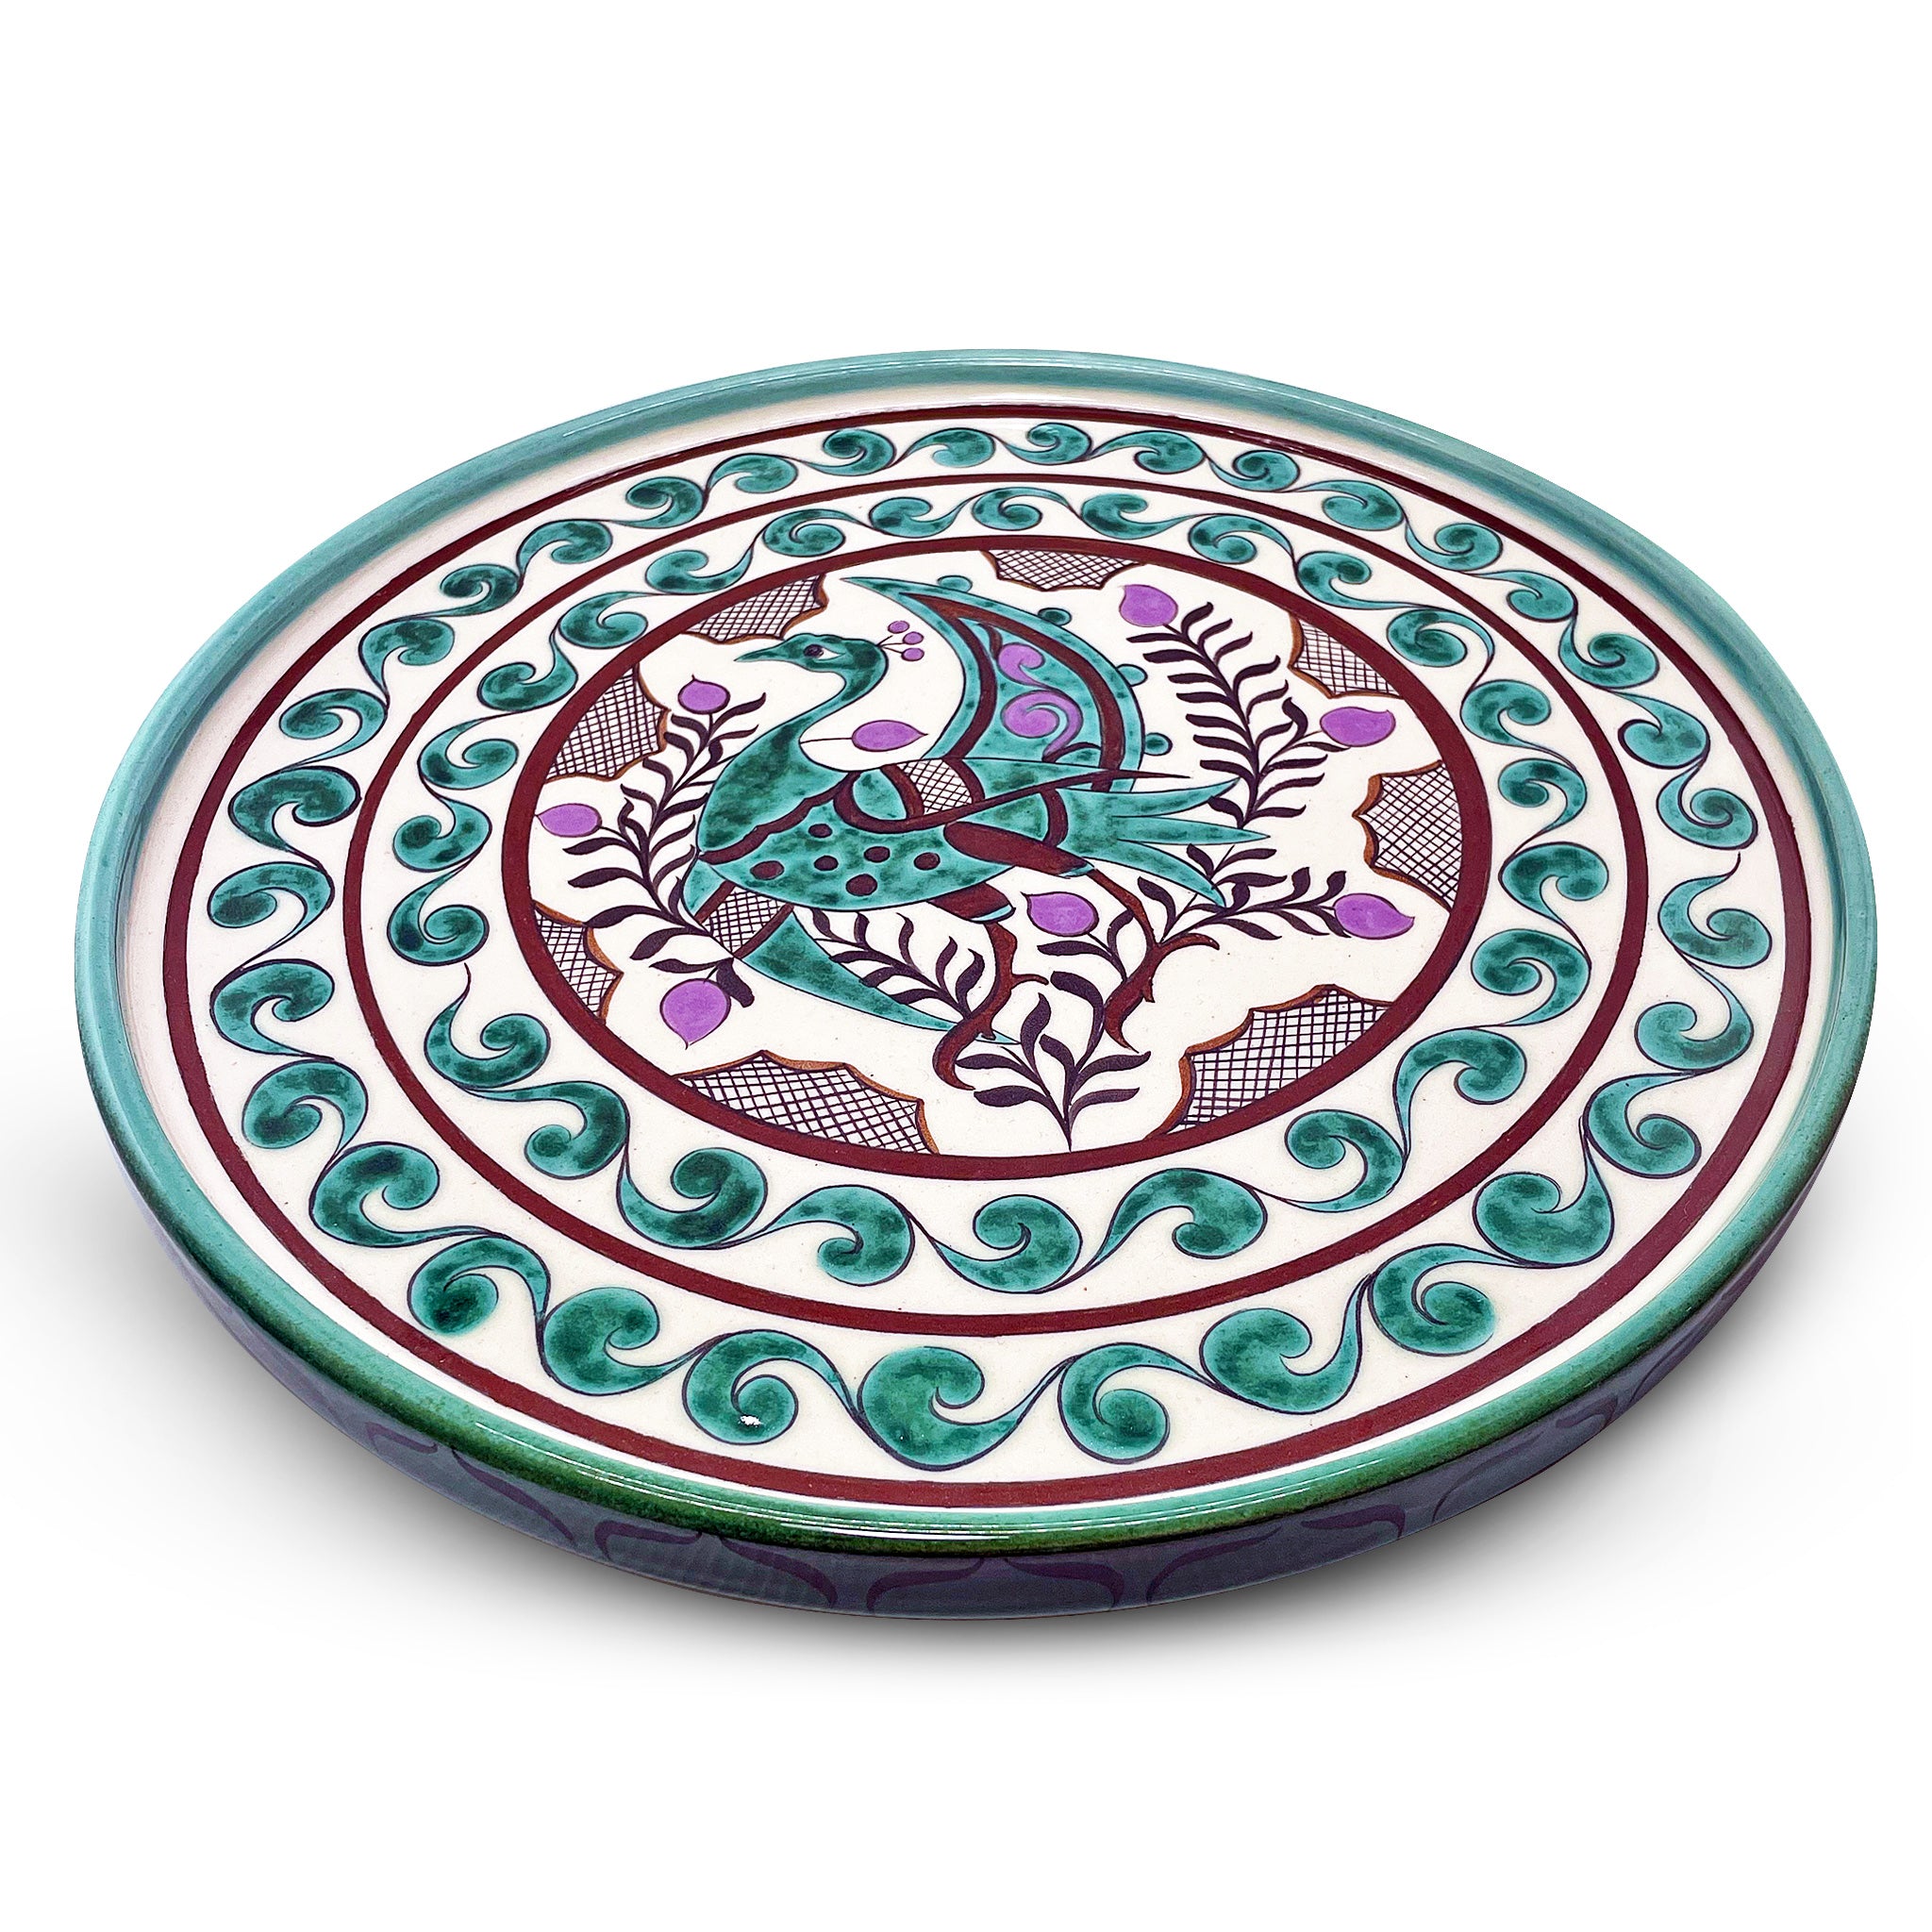 Serving Platter | Handmade Traditional Turkish Green Turquoise Georgetown Olive Oil